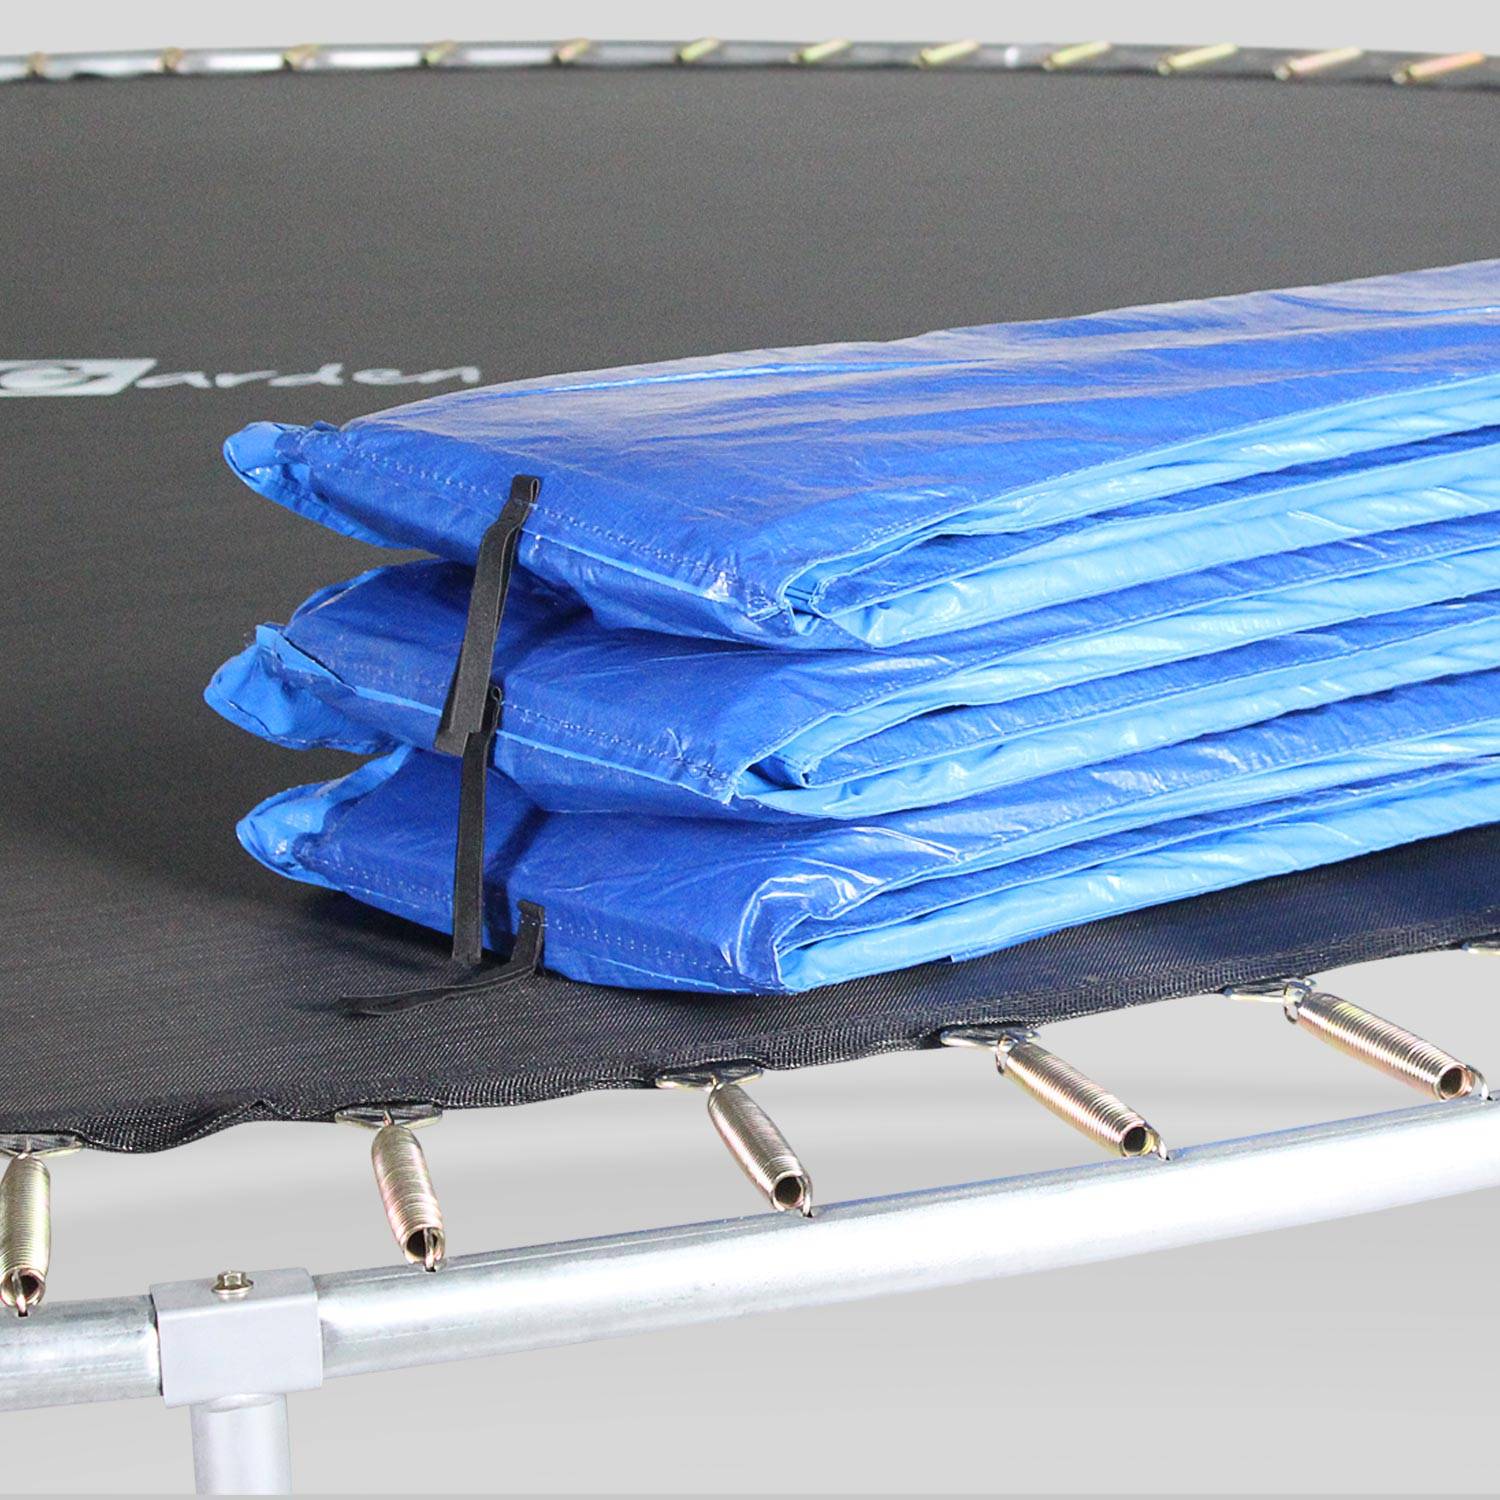 Trampoline tower protection pad 400cm - 22mm - Blue,sweeek,Photo2